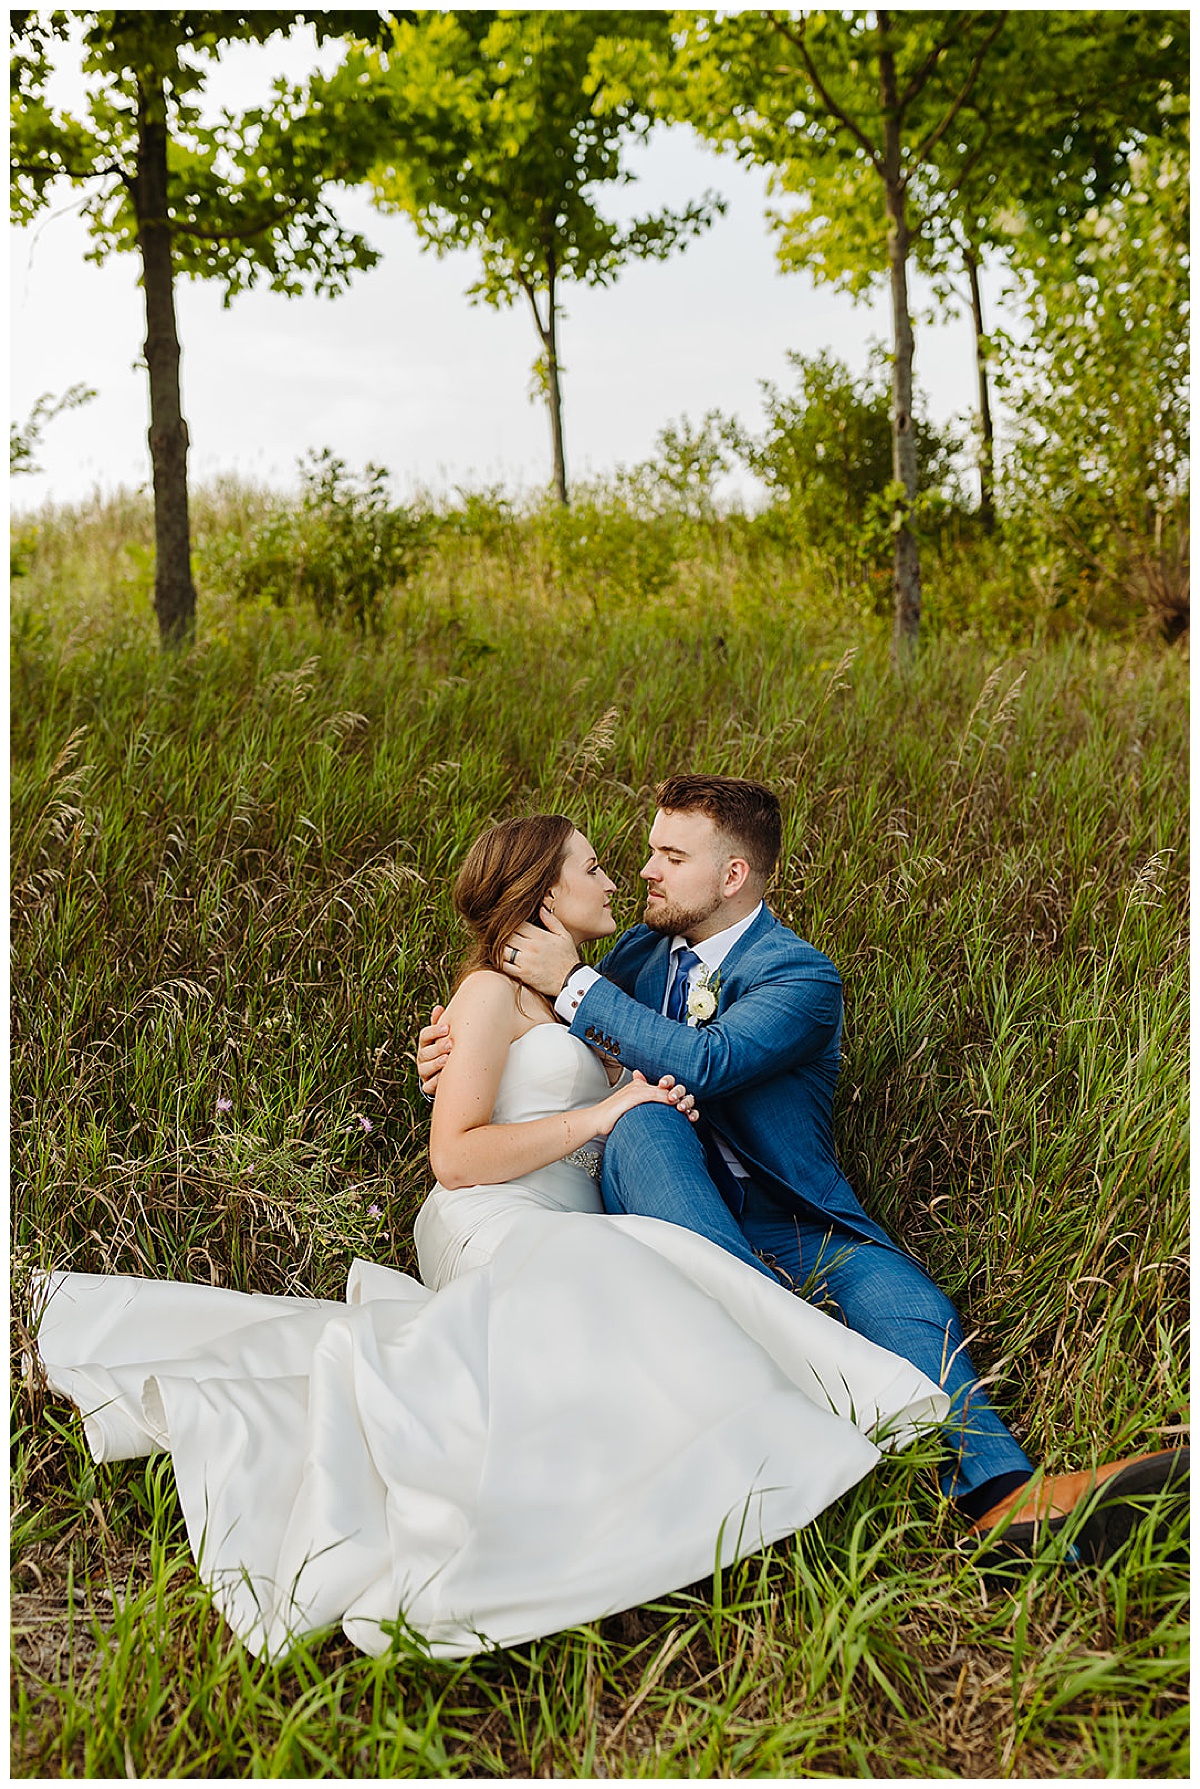 Husband and wife embrace on a hillside for Bayview Weddings